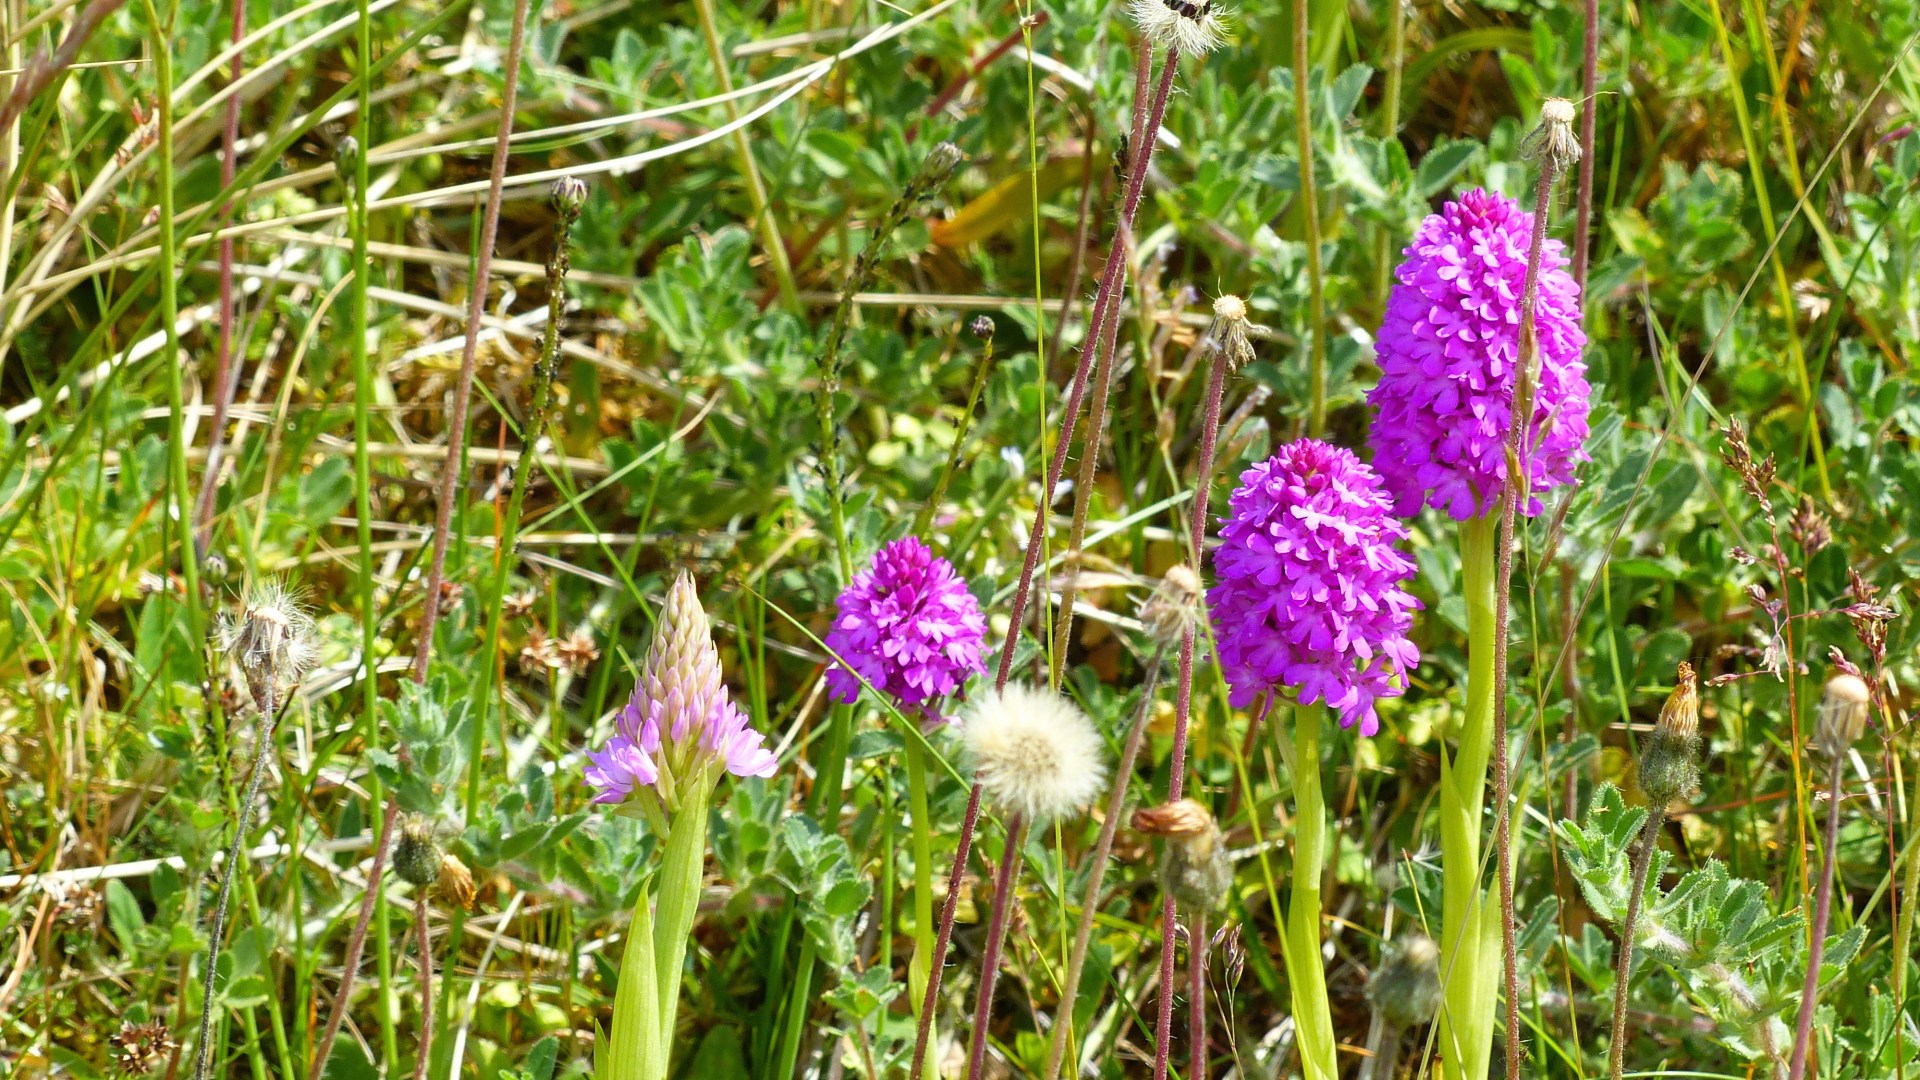 Pyramidal Orchids in dune grassland